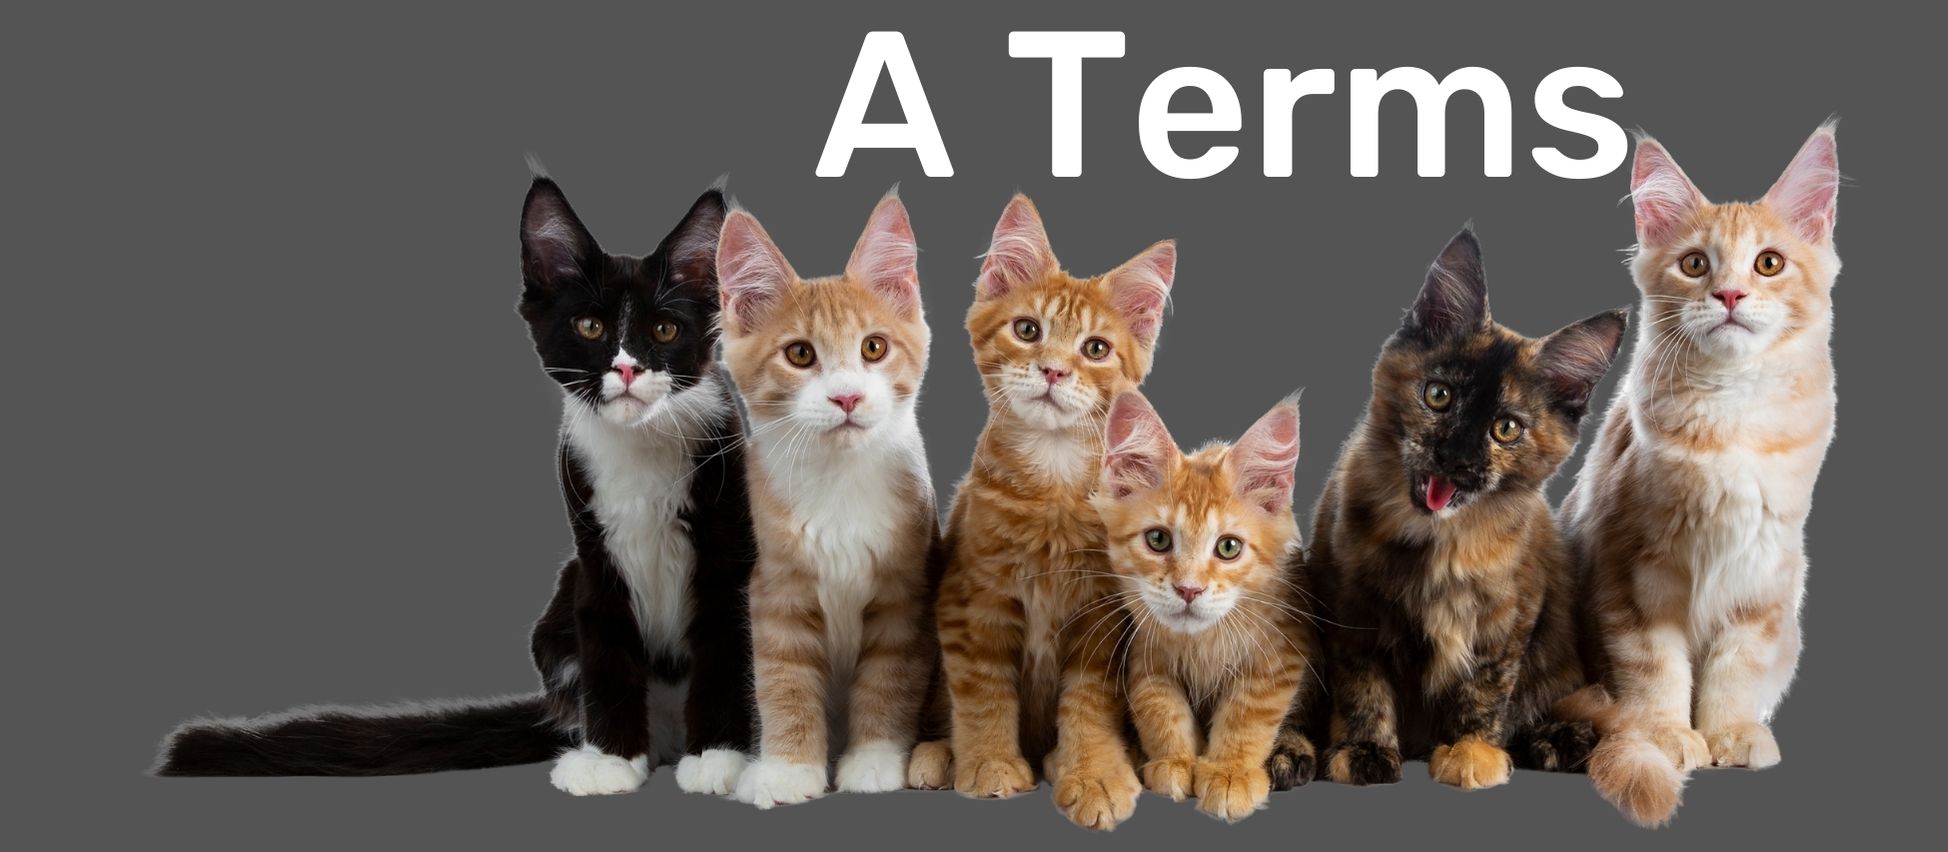 Group of six cats in front of a gray background with text reading 'A Terms' at the top to indicate a new section of the glossary